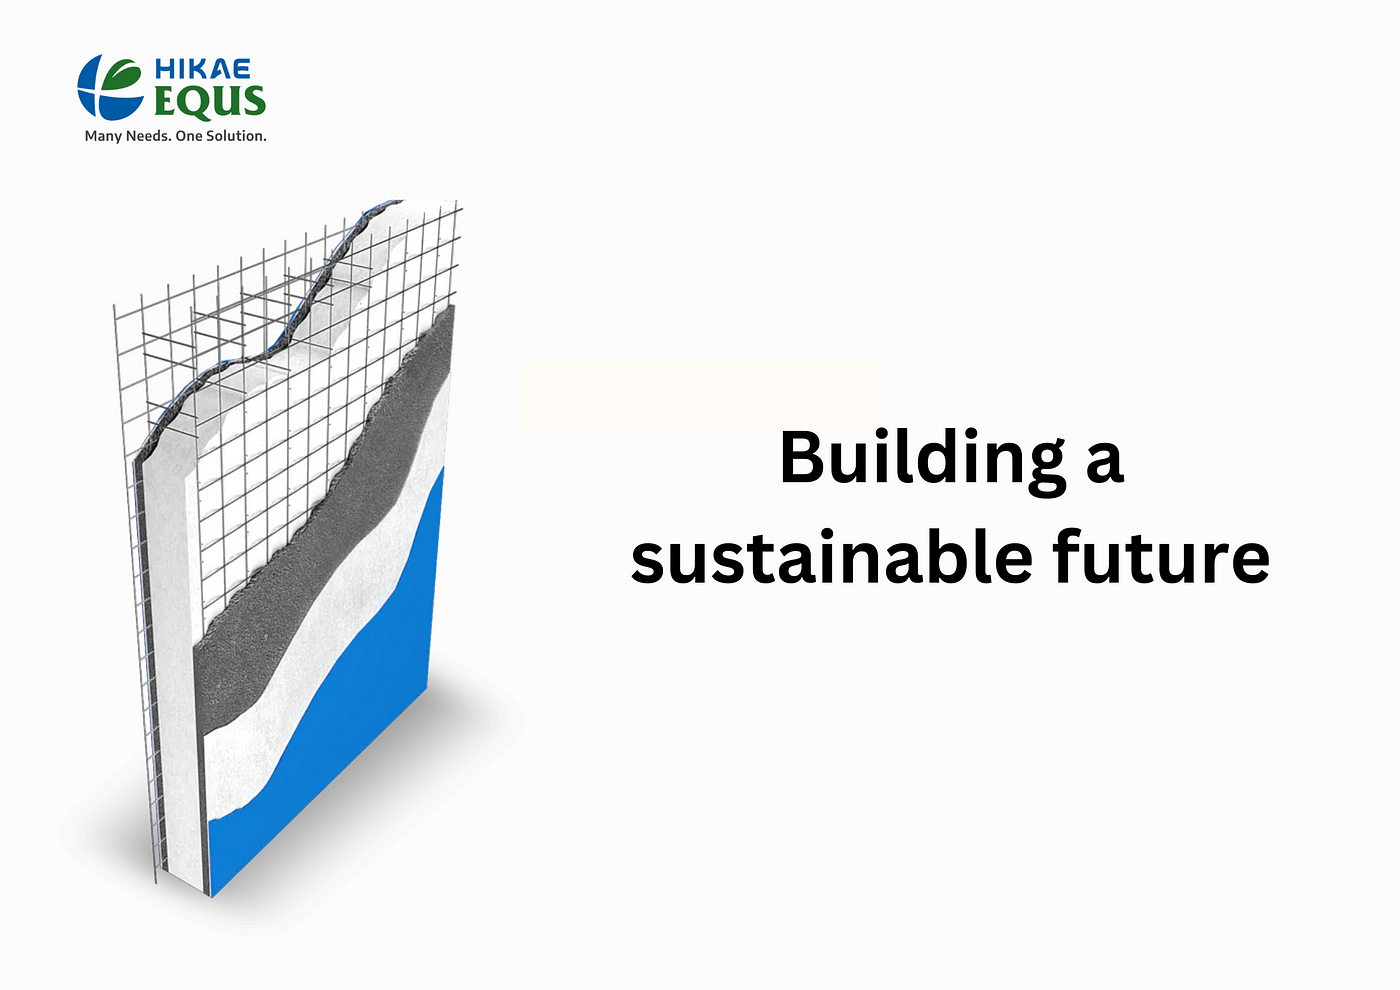 Building A Sustainable Future. The construction industry has